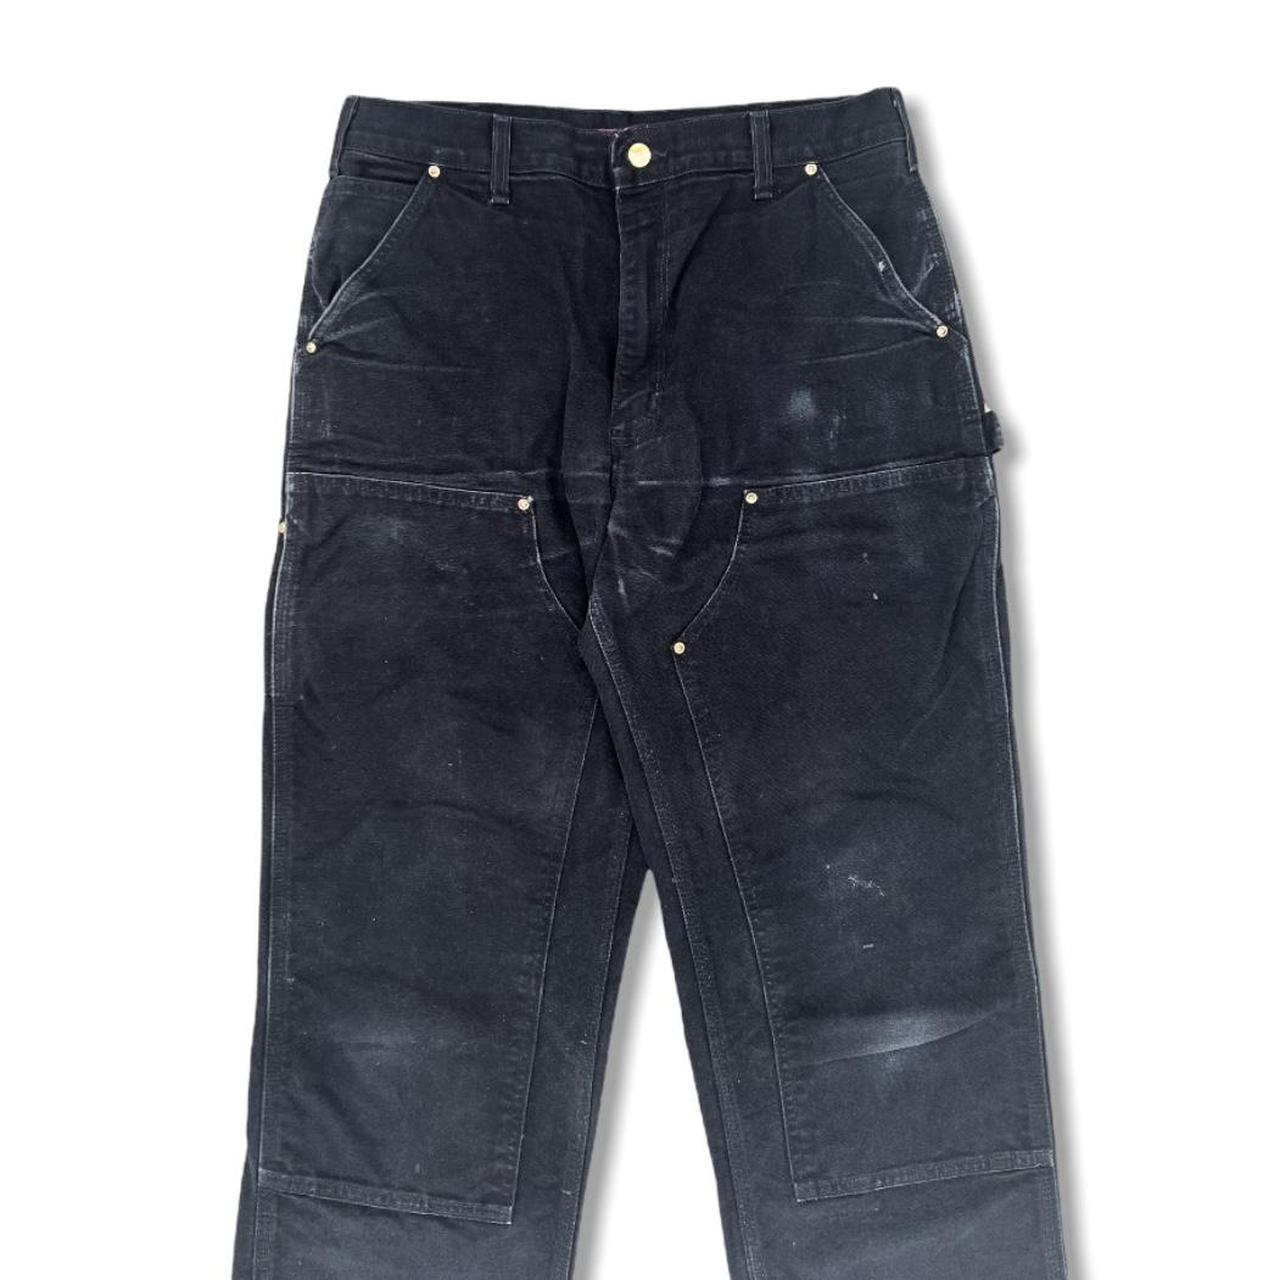 Product Image 3 - Vintage Carhartt Work Pants Double